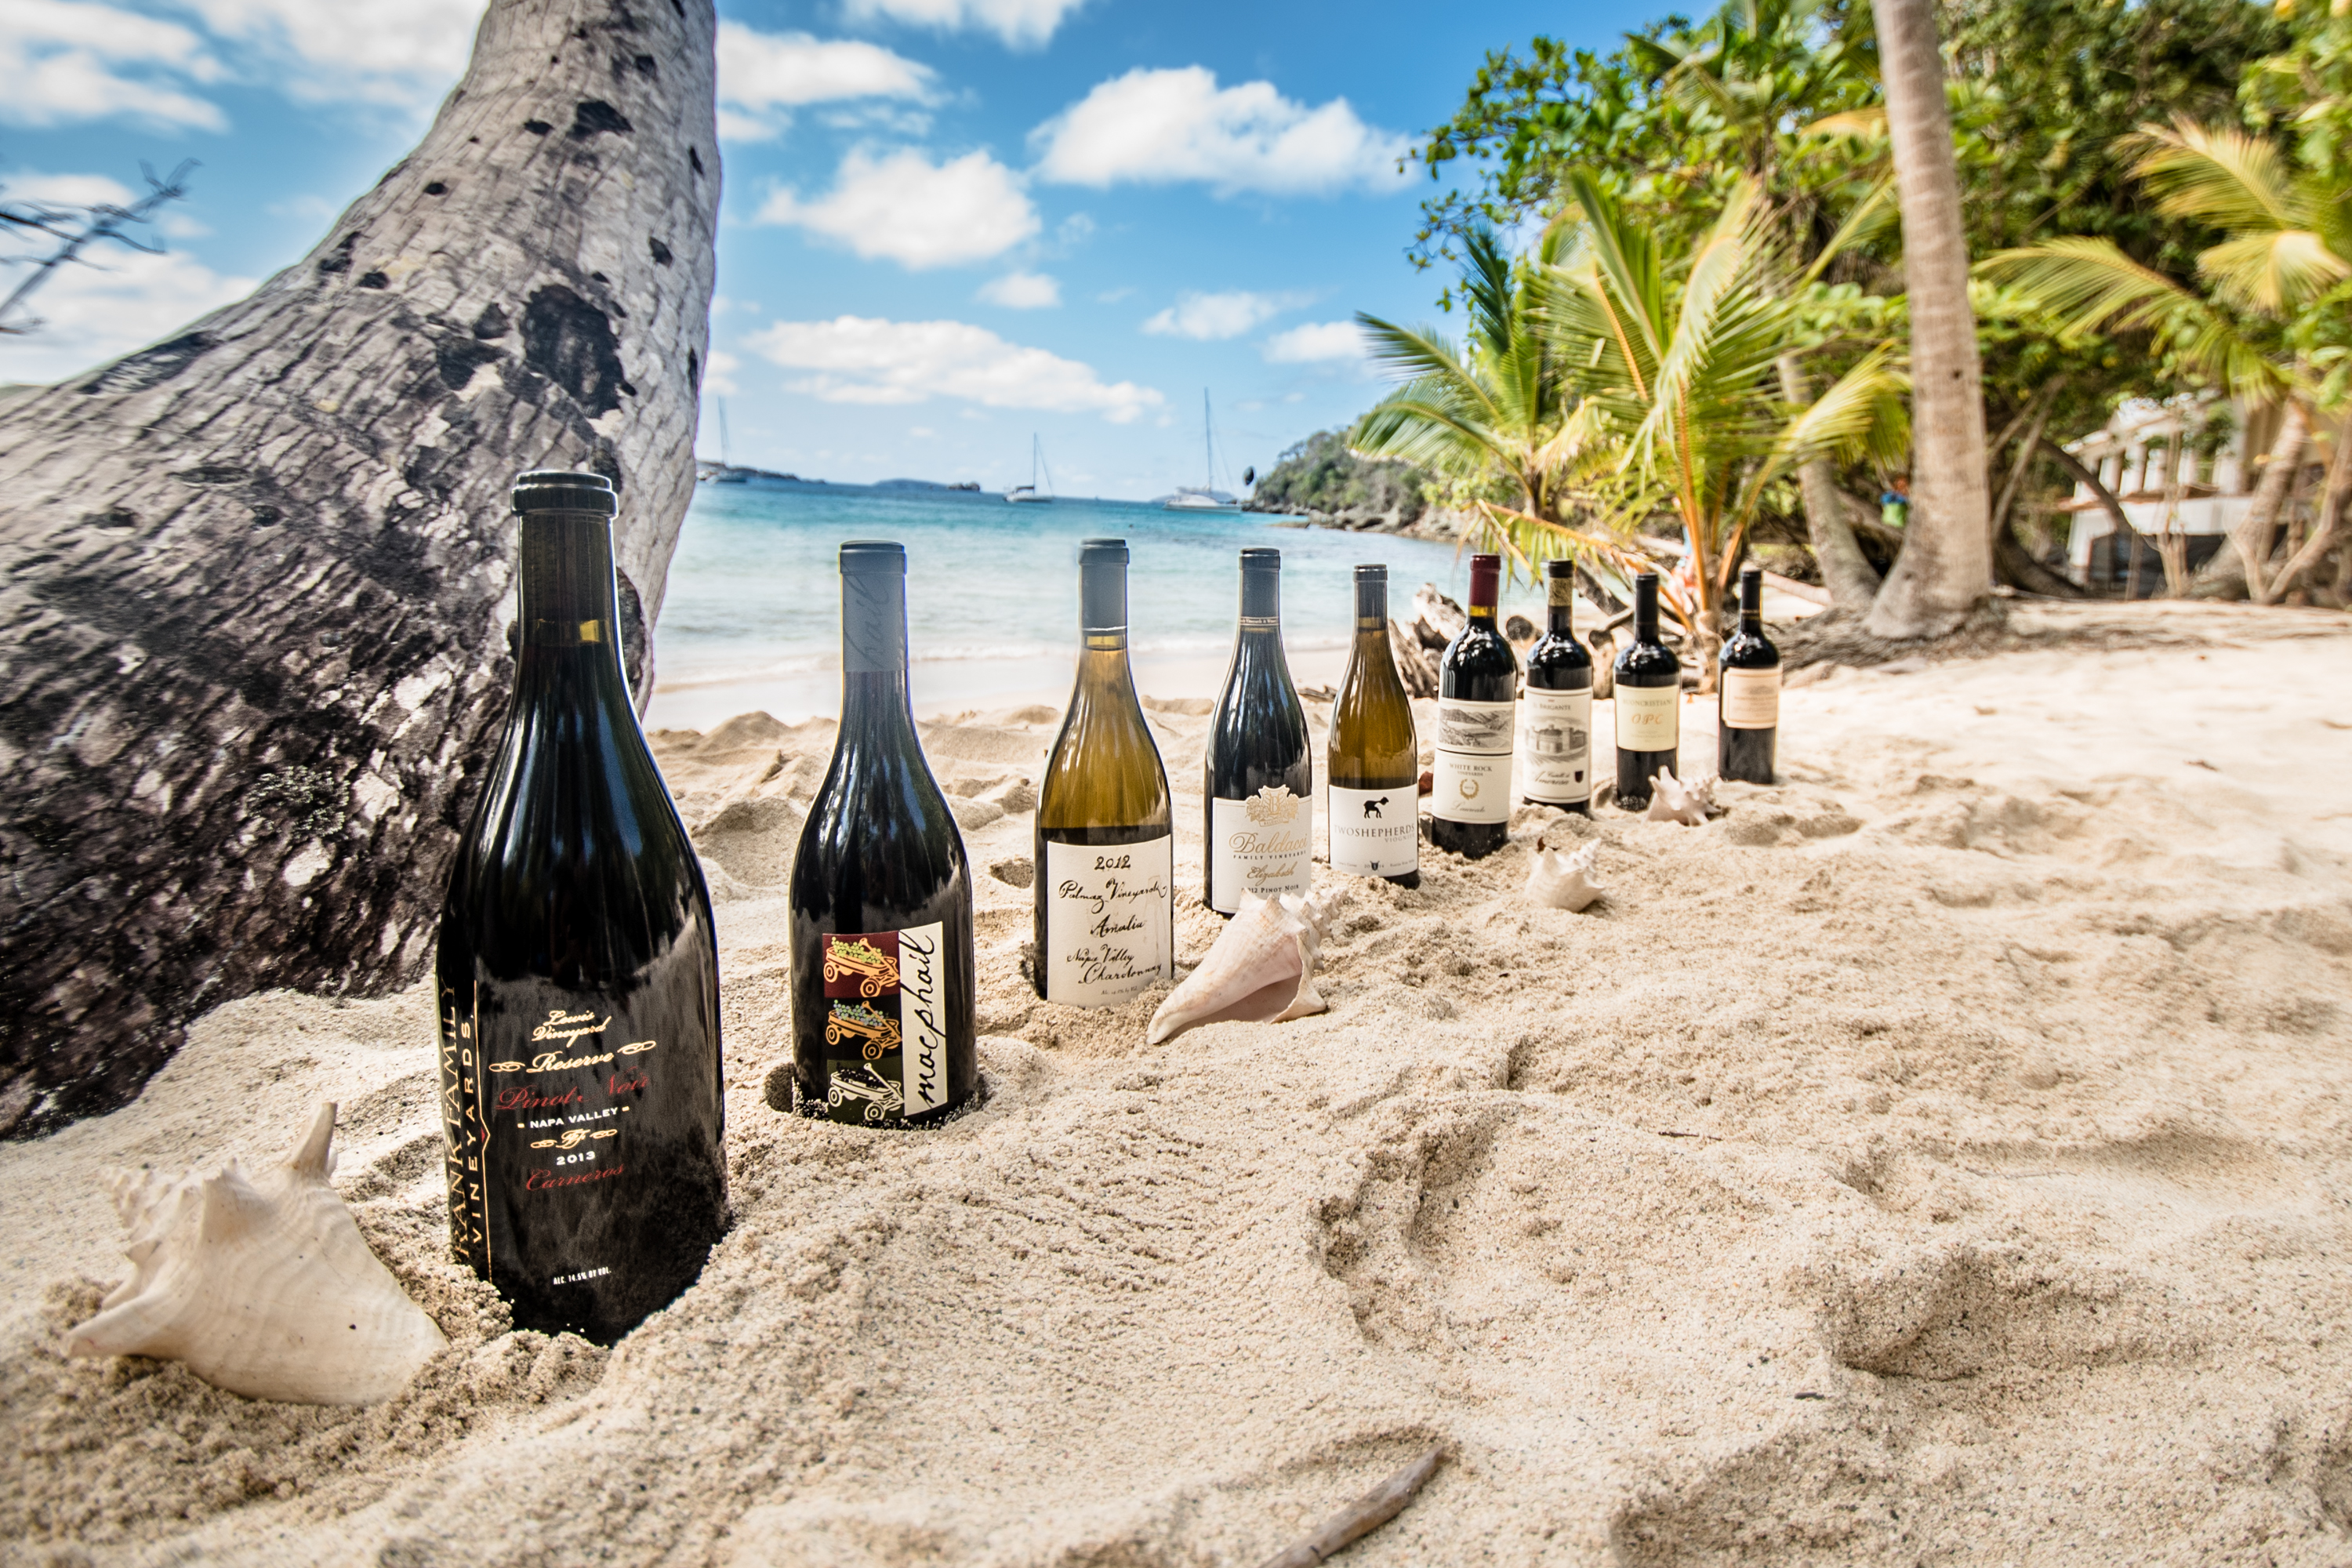 Caribbean Wine Club - Wines in the sand